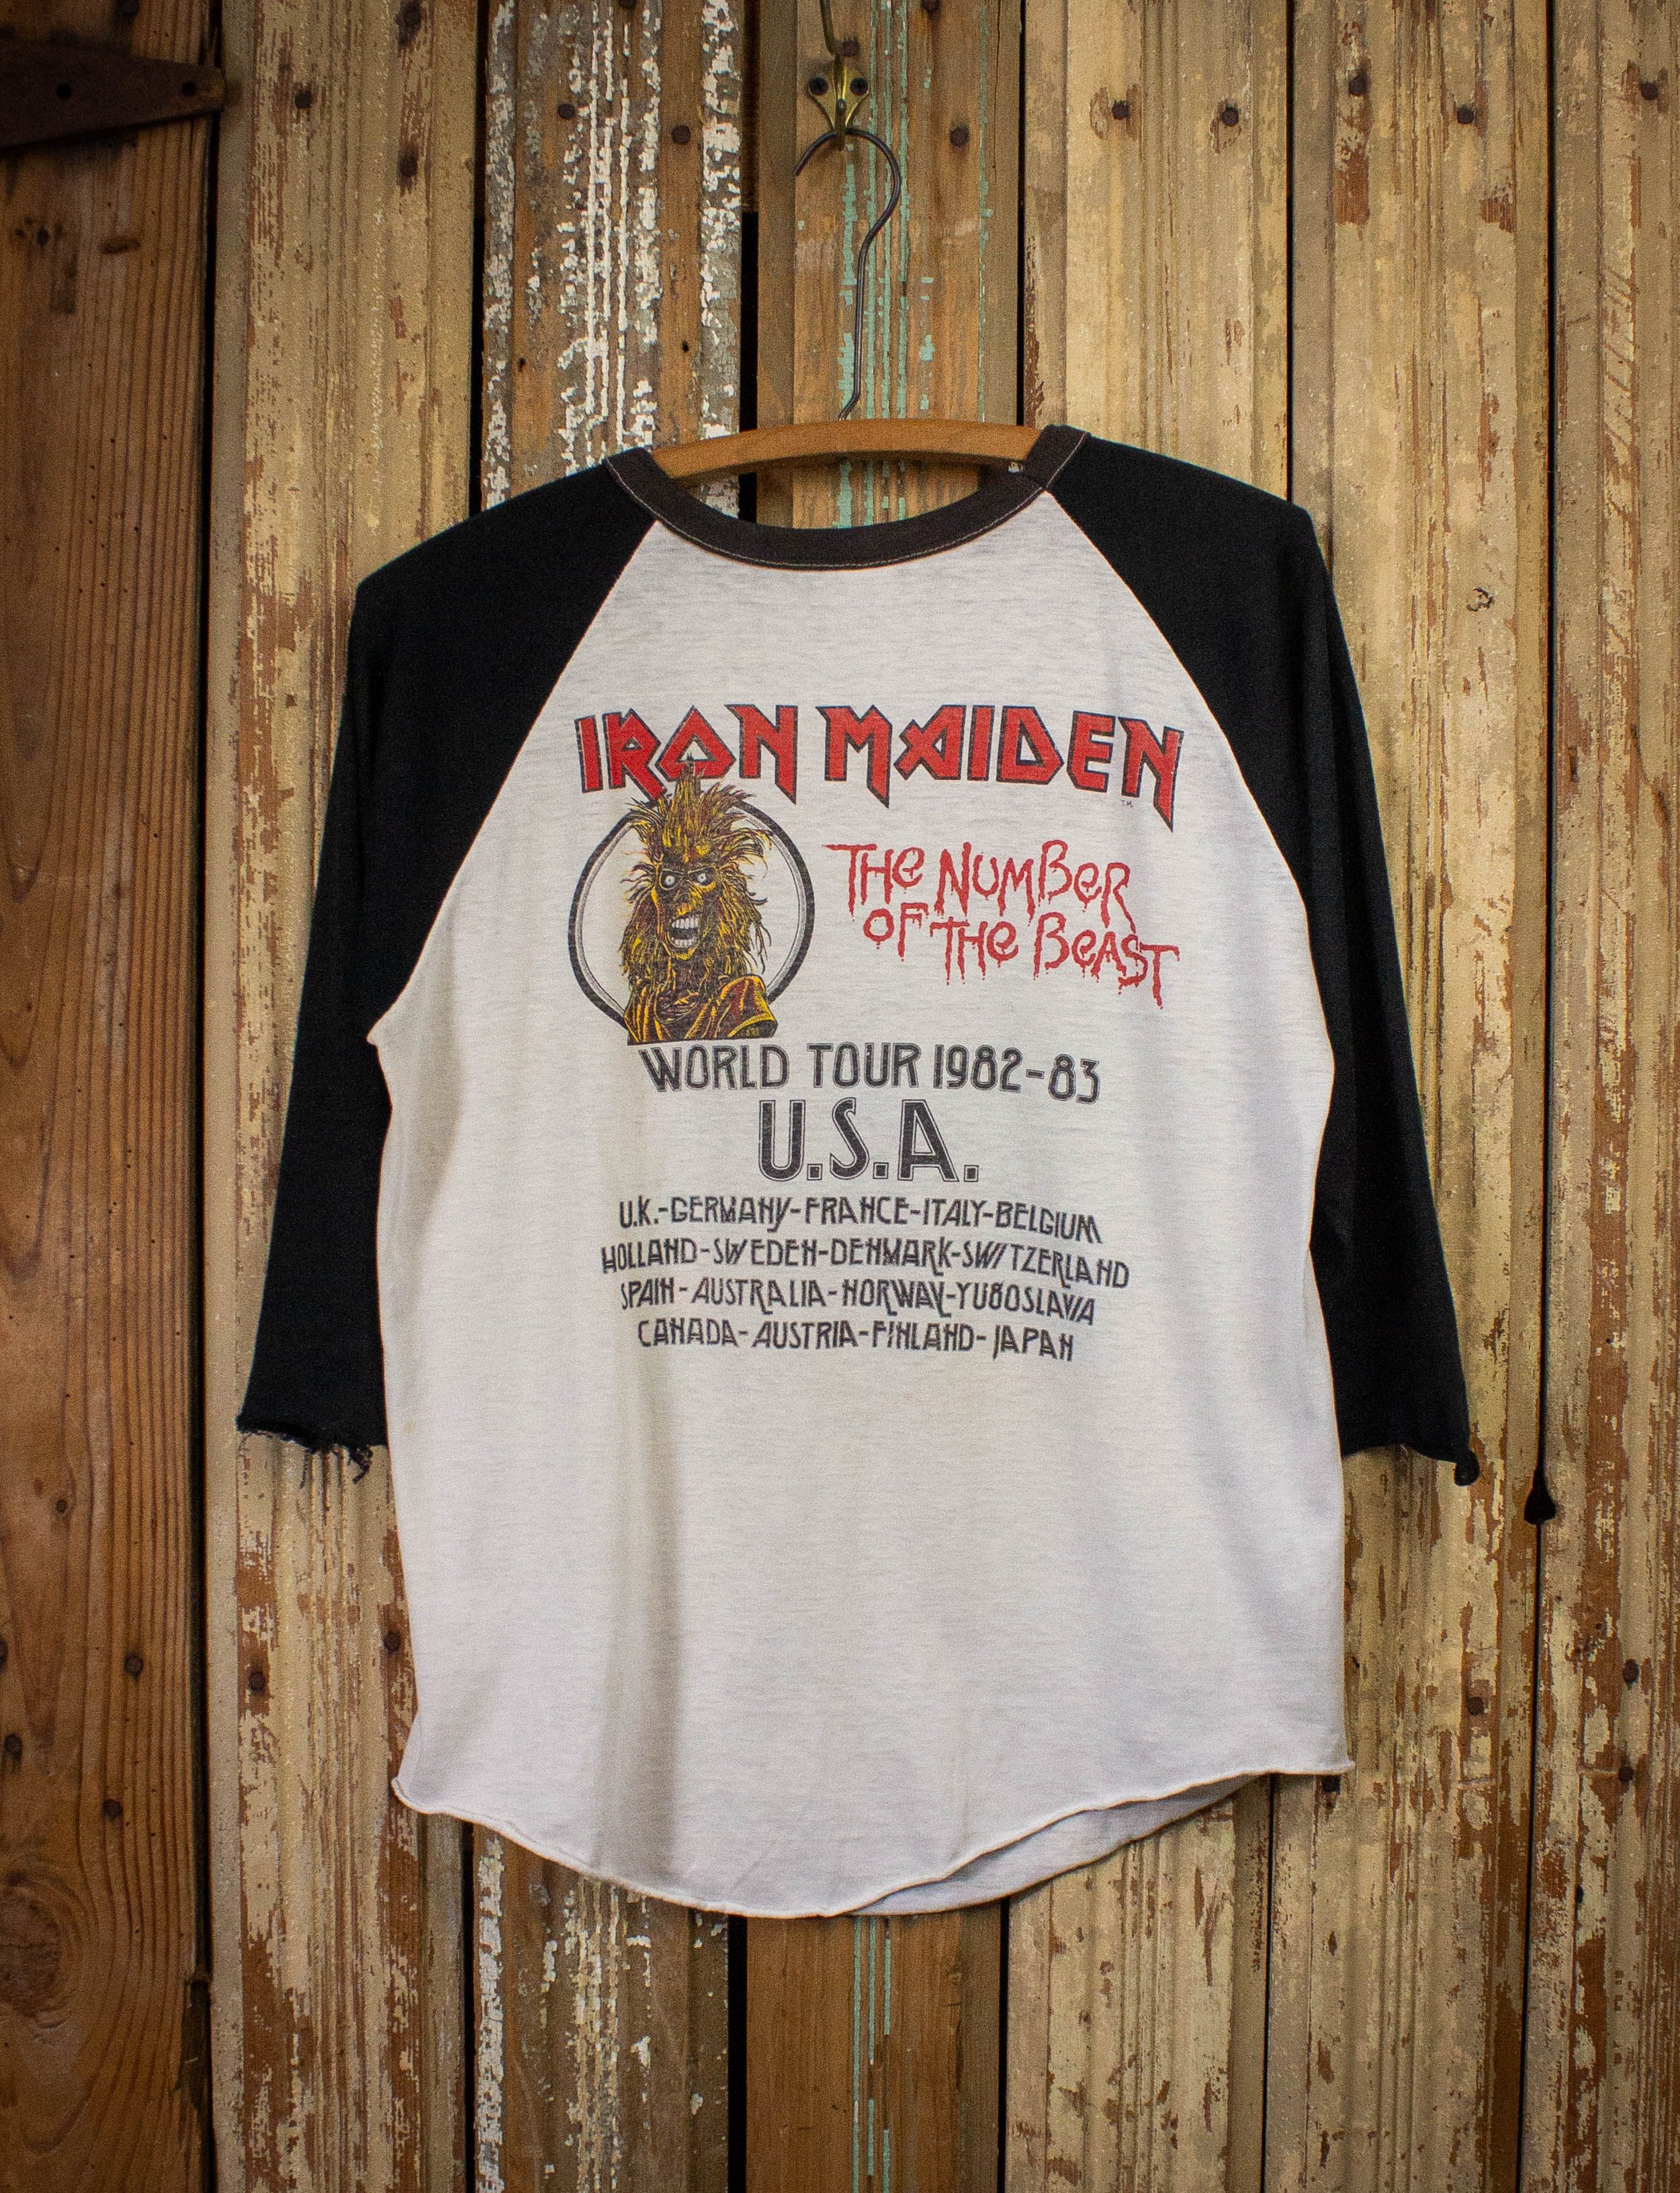 Vintage Iron Maiden 1982 The Number of The Beast Tour Raglan T Shirt Size US M / EU 48-50 / 2 - 2 Preview